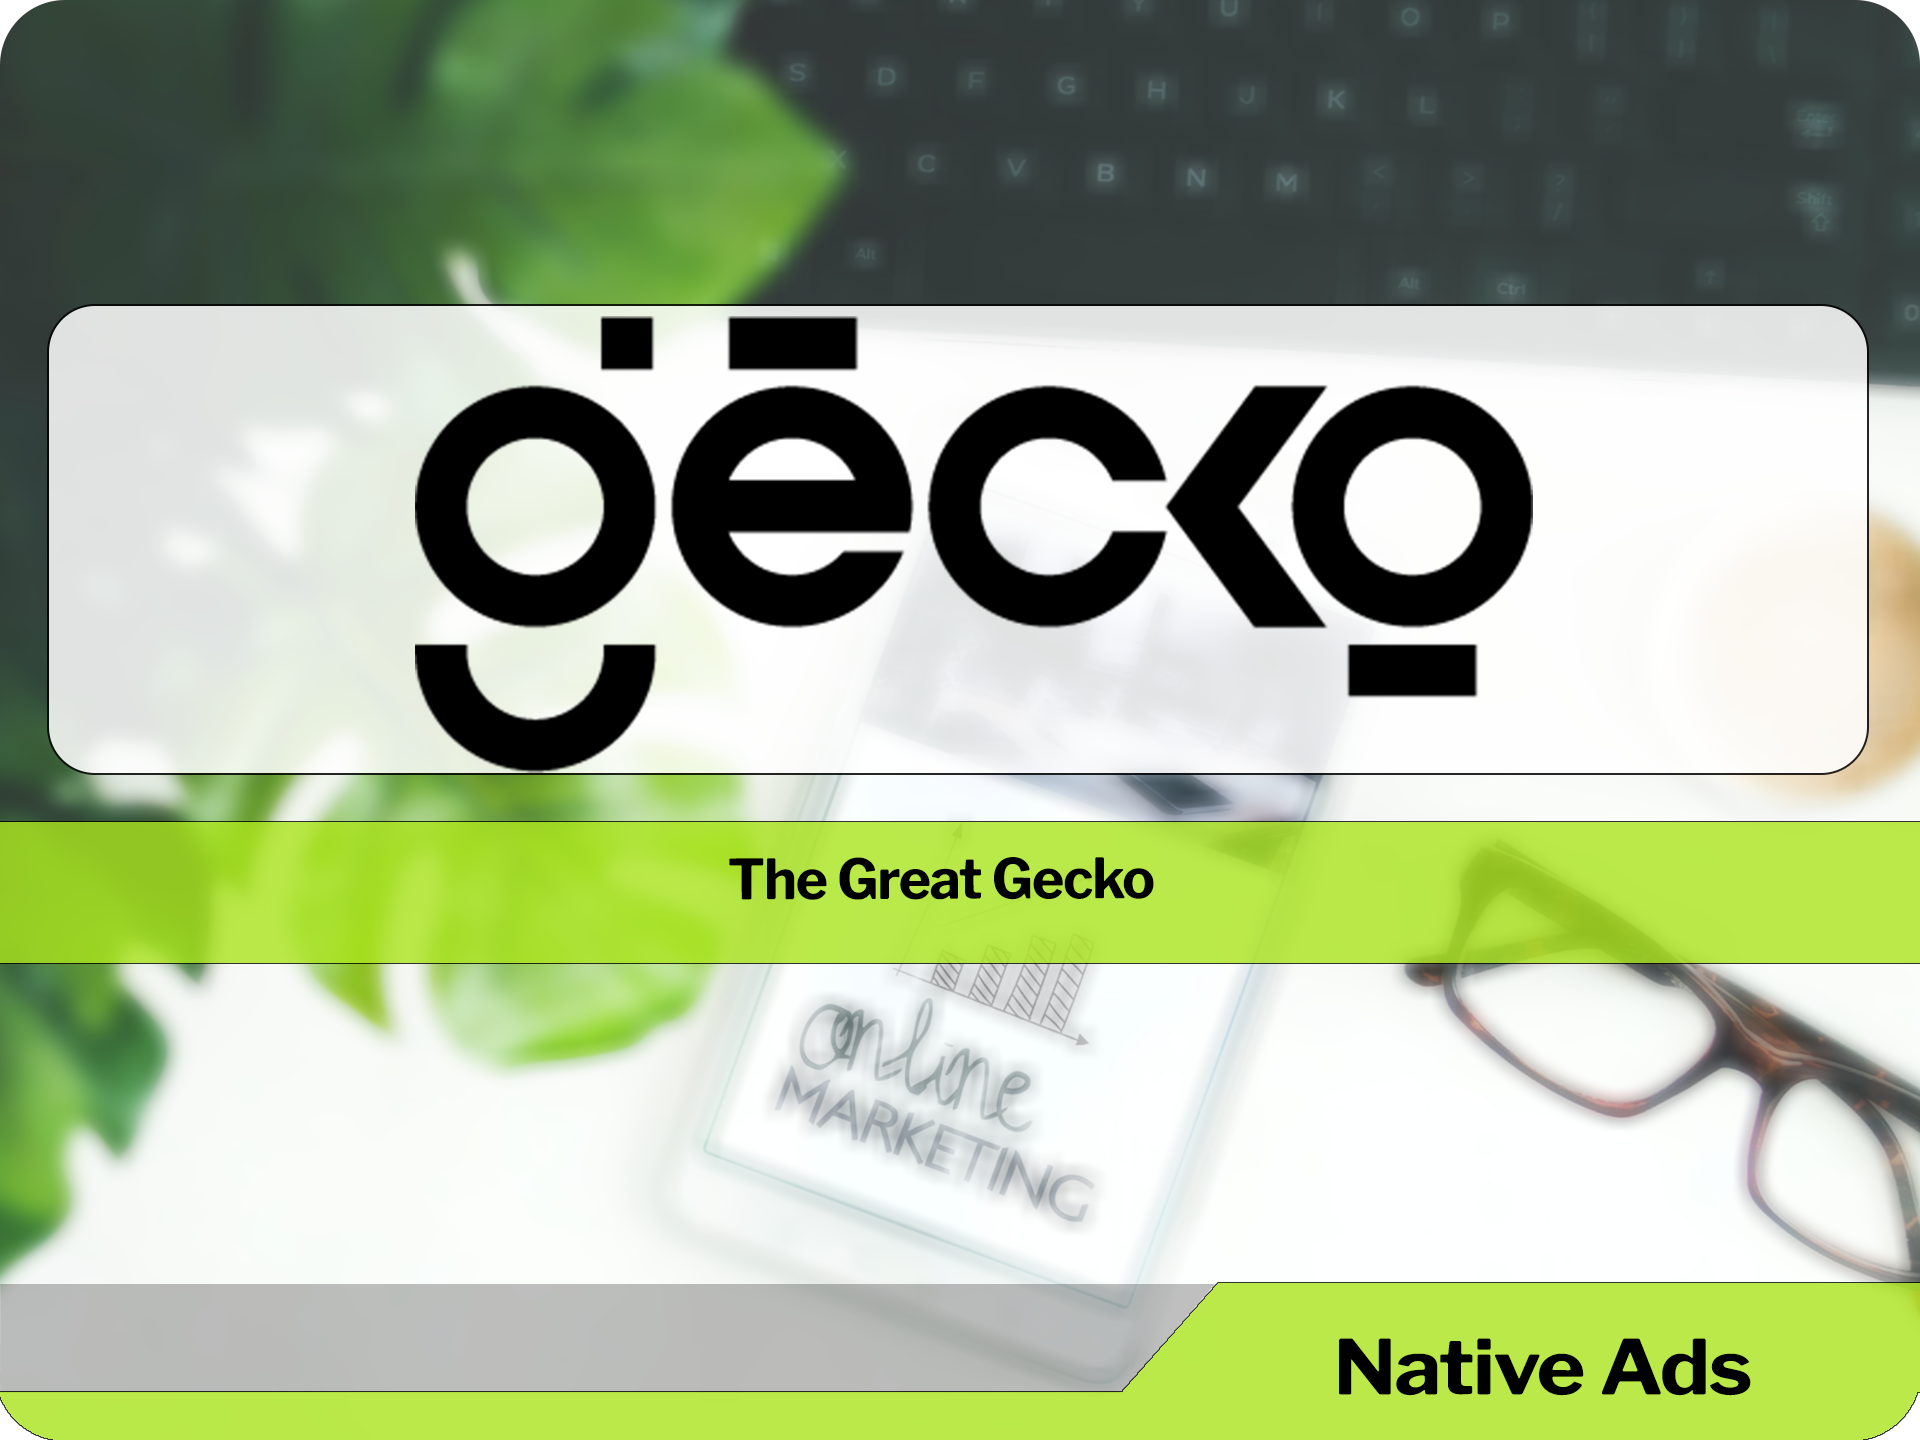 Gecko Ads makes your business expand